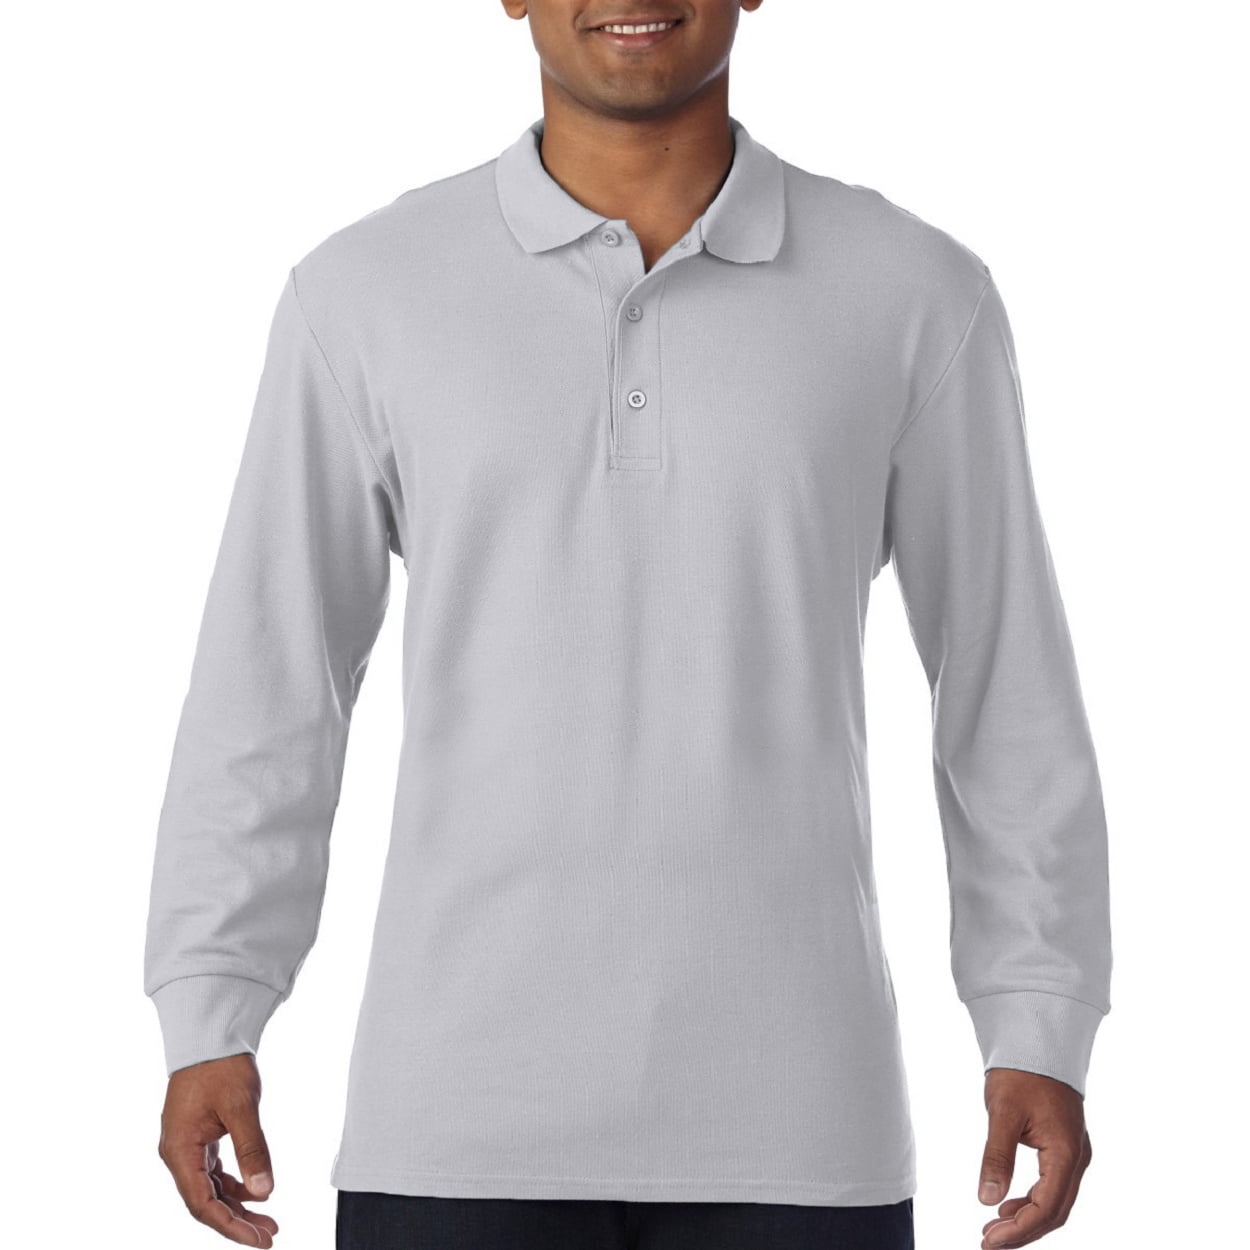 MEN'S FRUIT OF THE LOOM PREMIUM LONG SLEEVE 100% COTTON PIQUE POLO SHIRTS NEW 